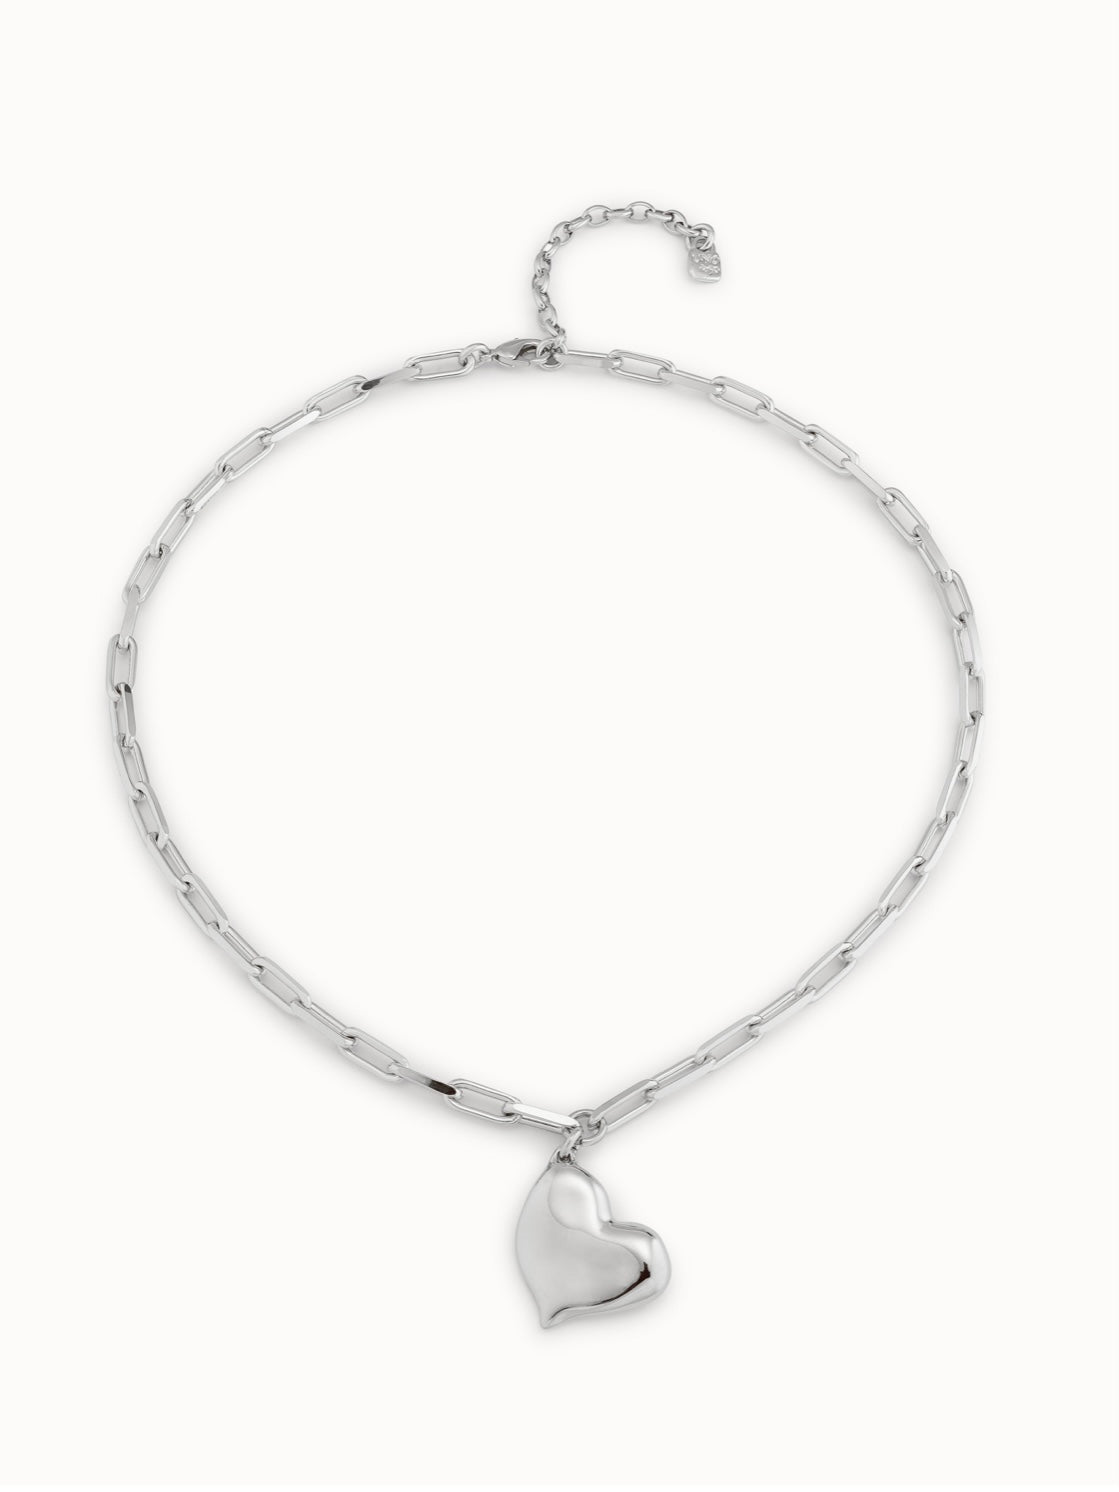 Heartbeat Necklace - Silver